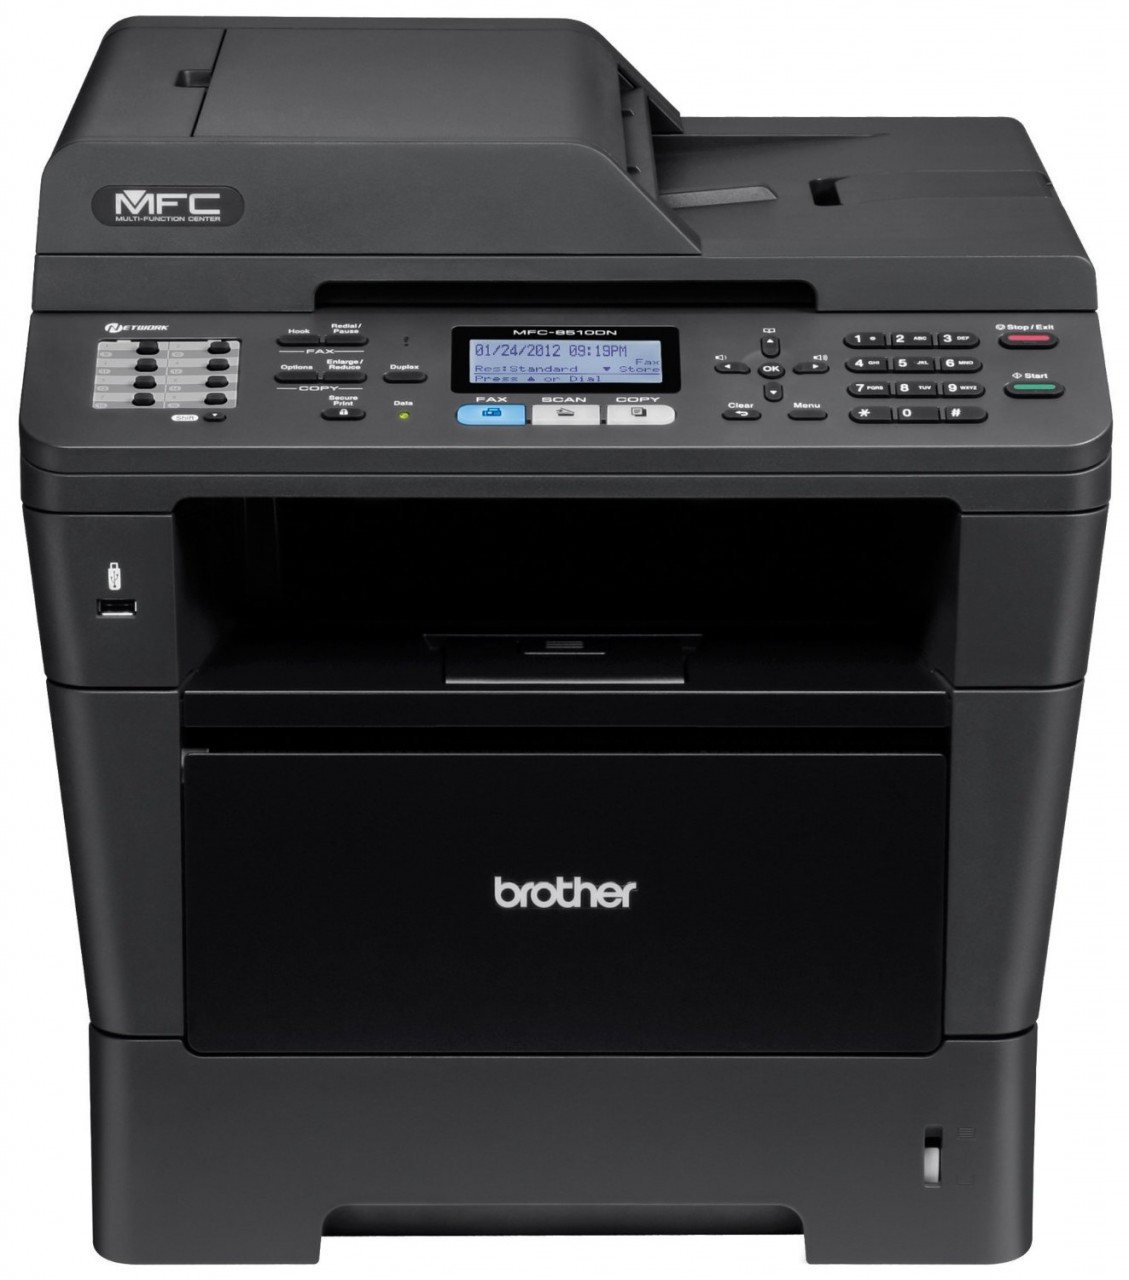 Brother MFC-8510DN